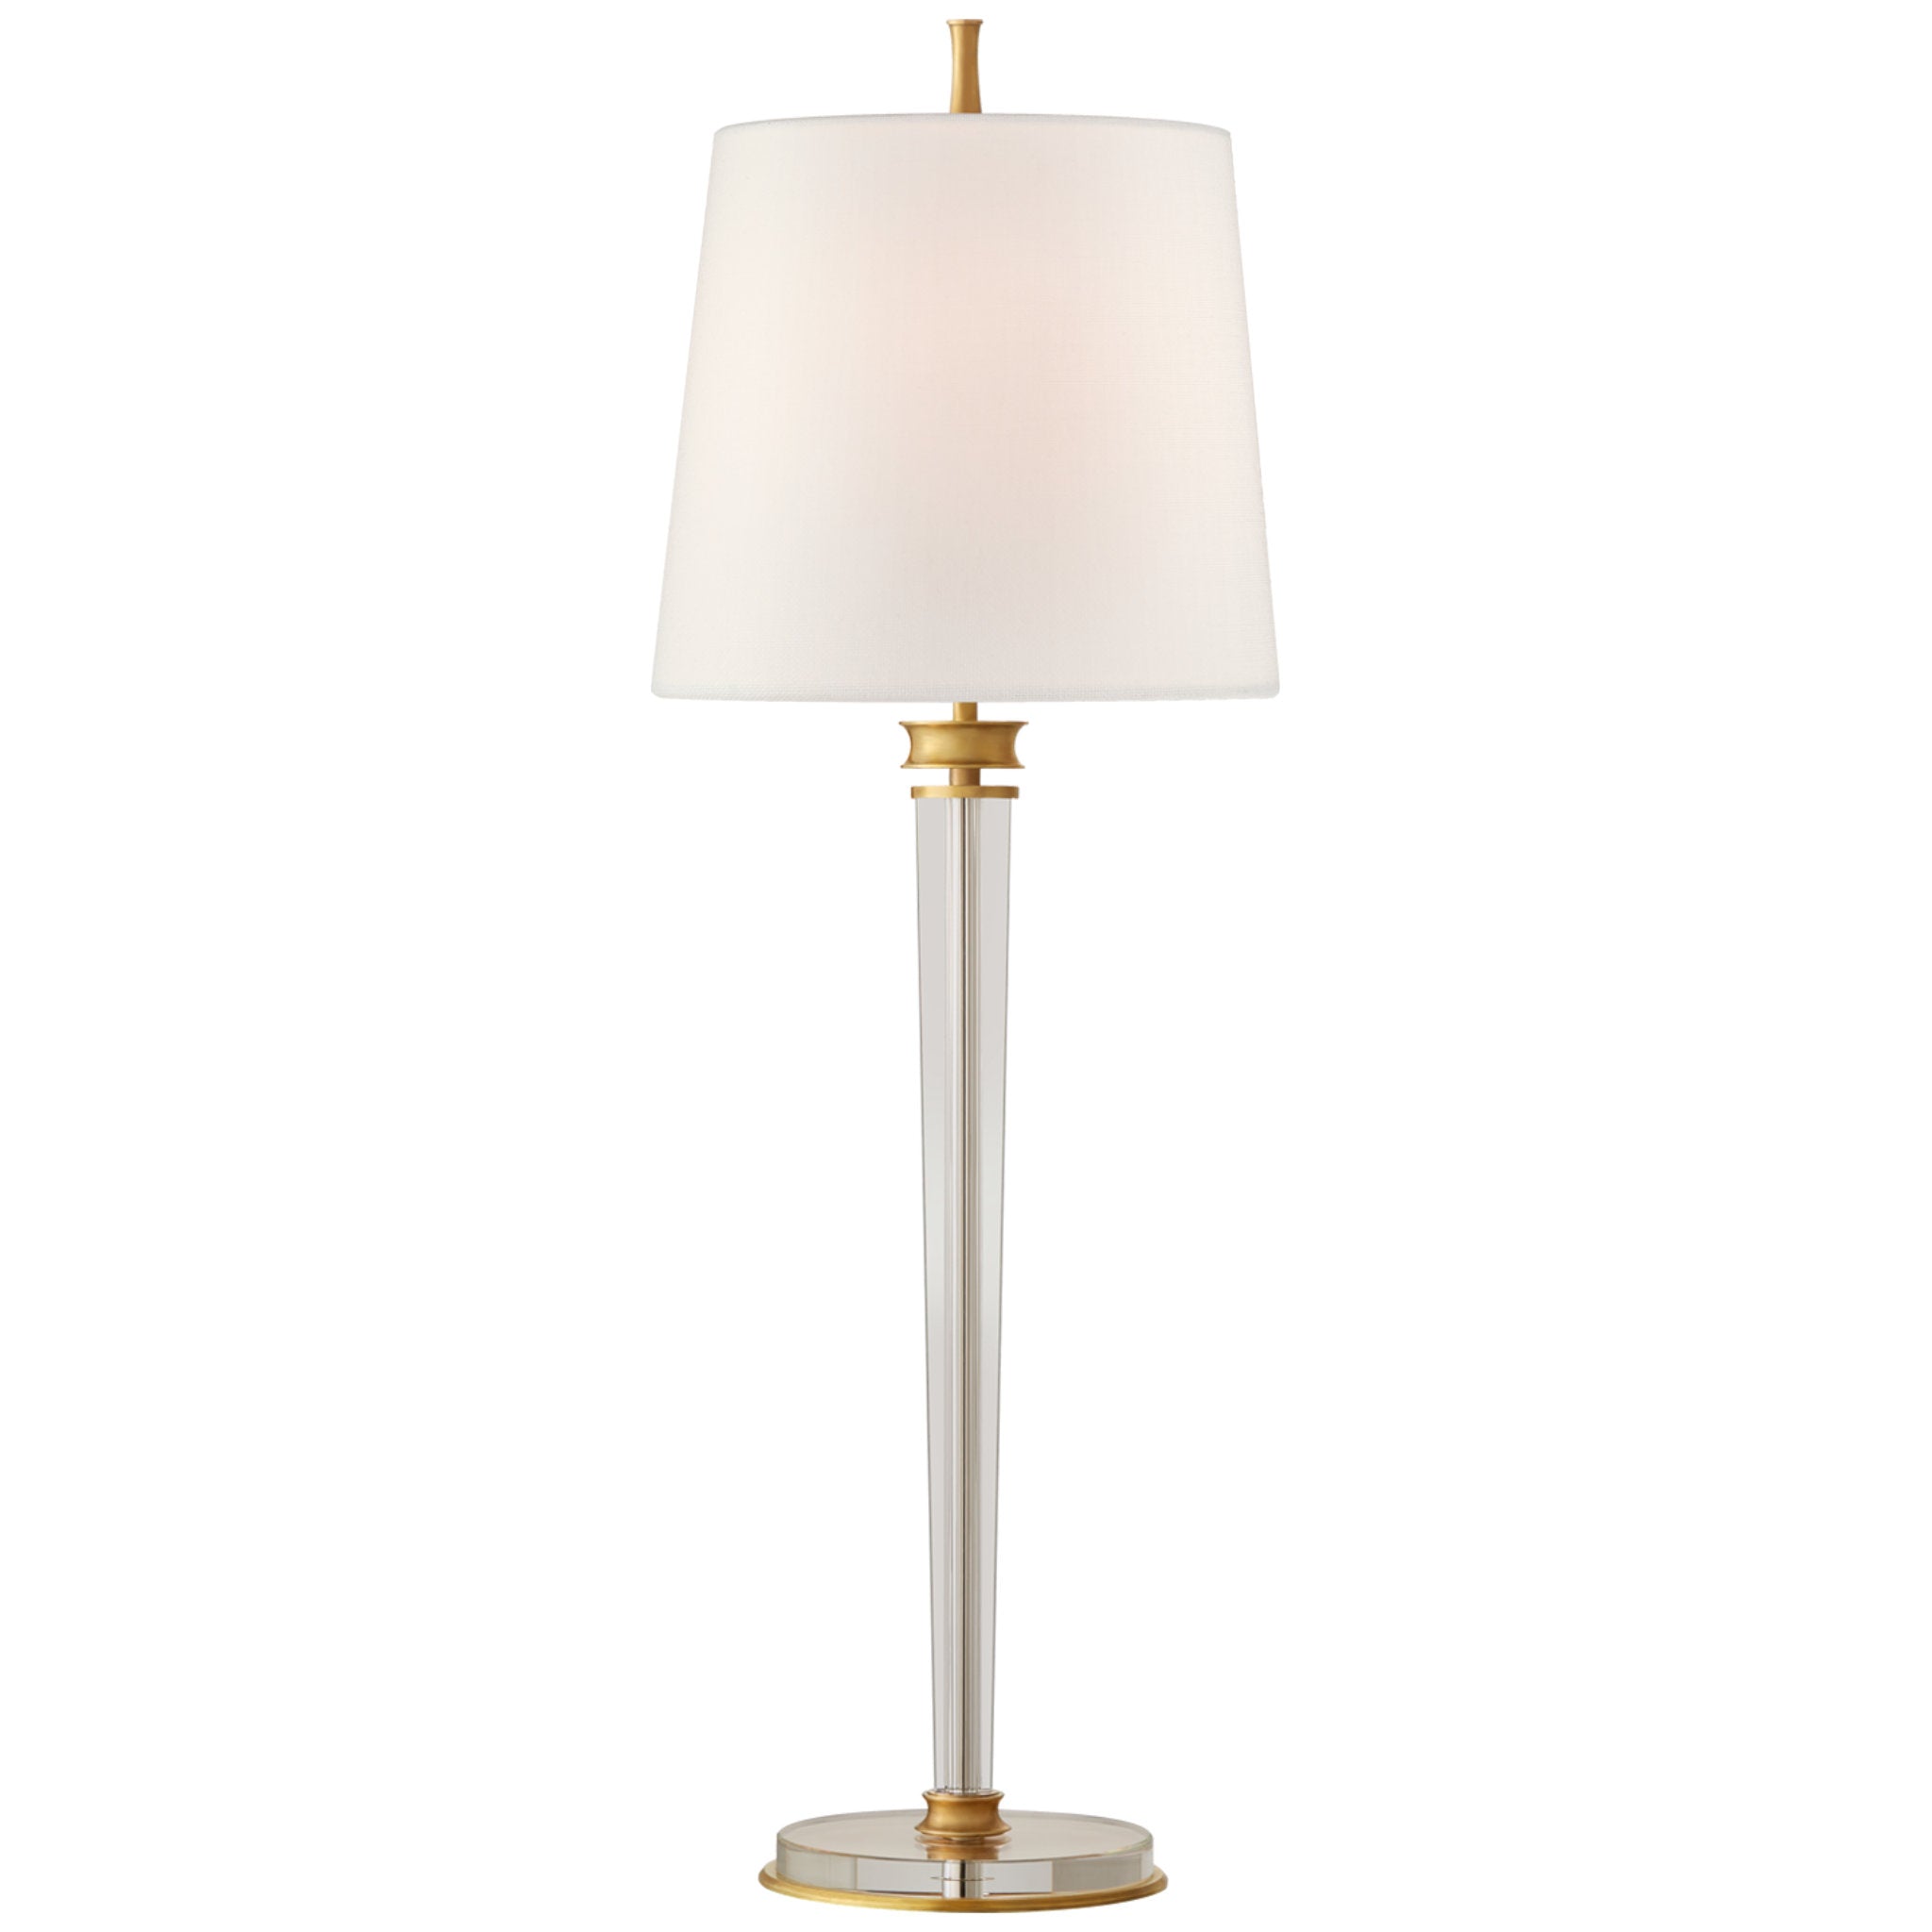 Thomas O'Brien Lyra Buffet Lamp in Hand-Rubbed Antique Brass and Cryst